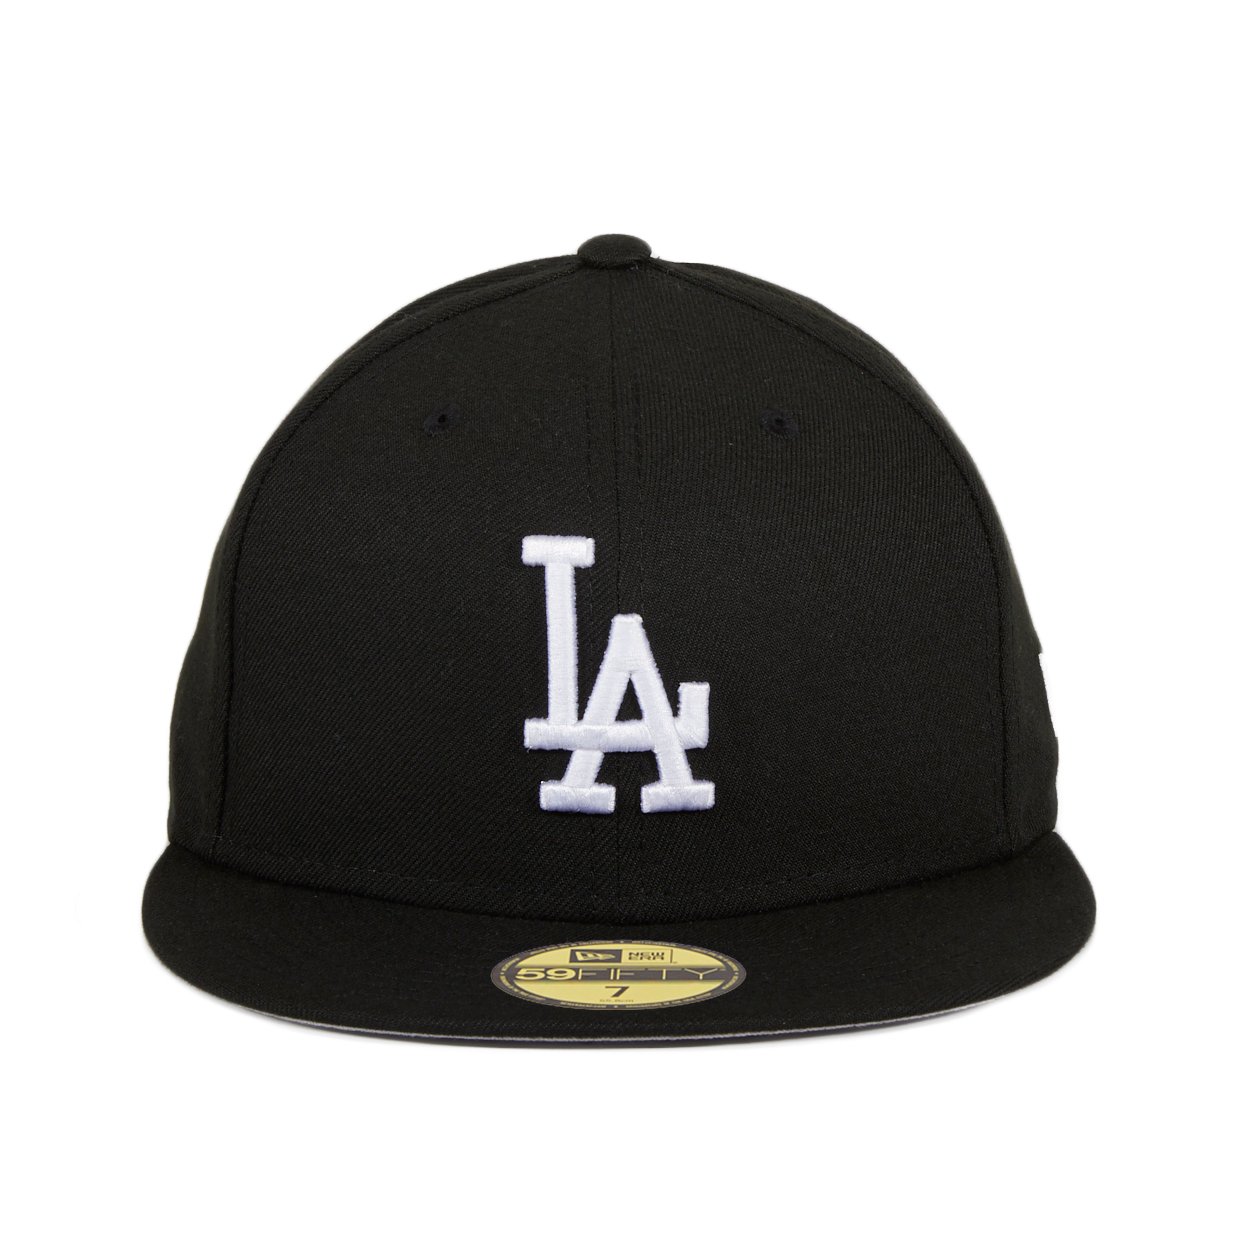 Los Angeles Dodgers New Era Black & White 59FIFTY Fitted Hat - Black 7 5/8